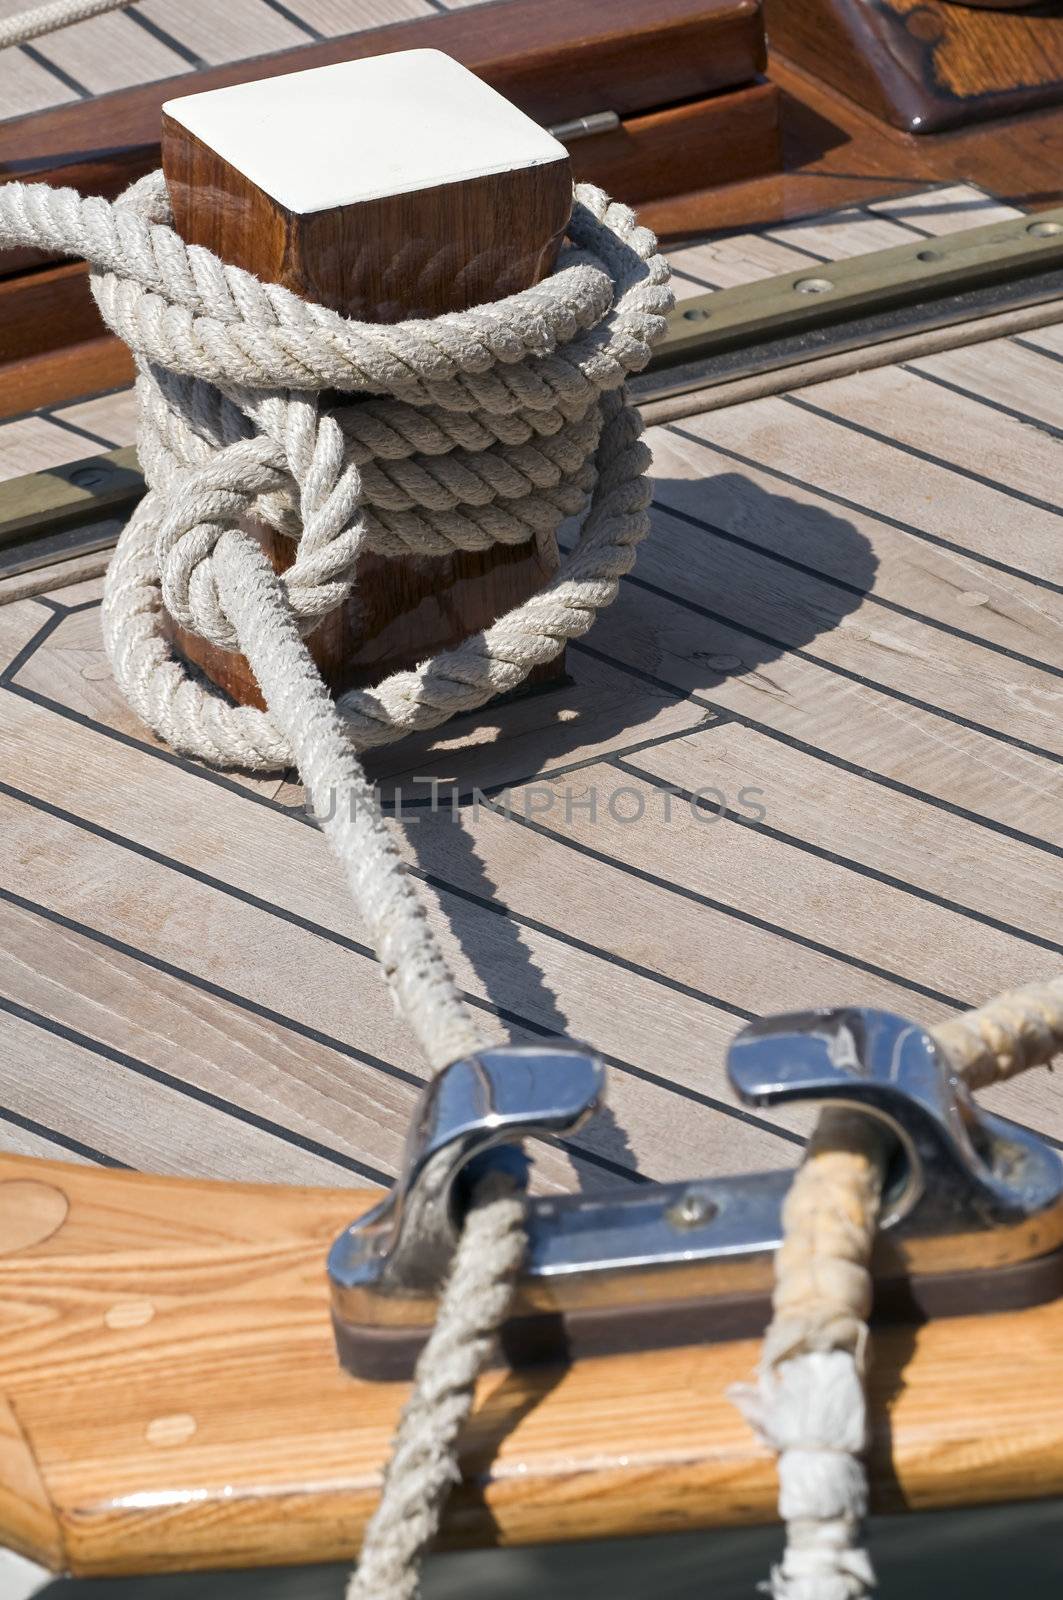 Detail of a wooden boat with rope tied up on a bitt